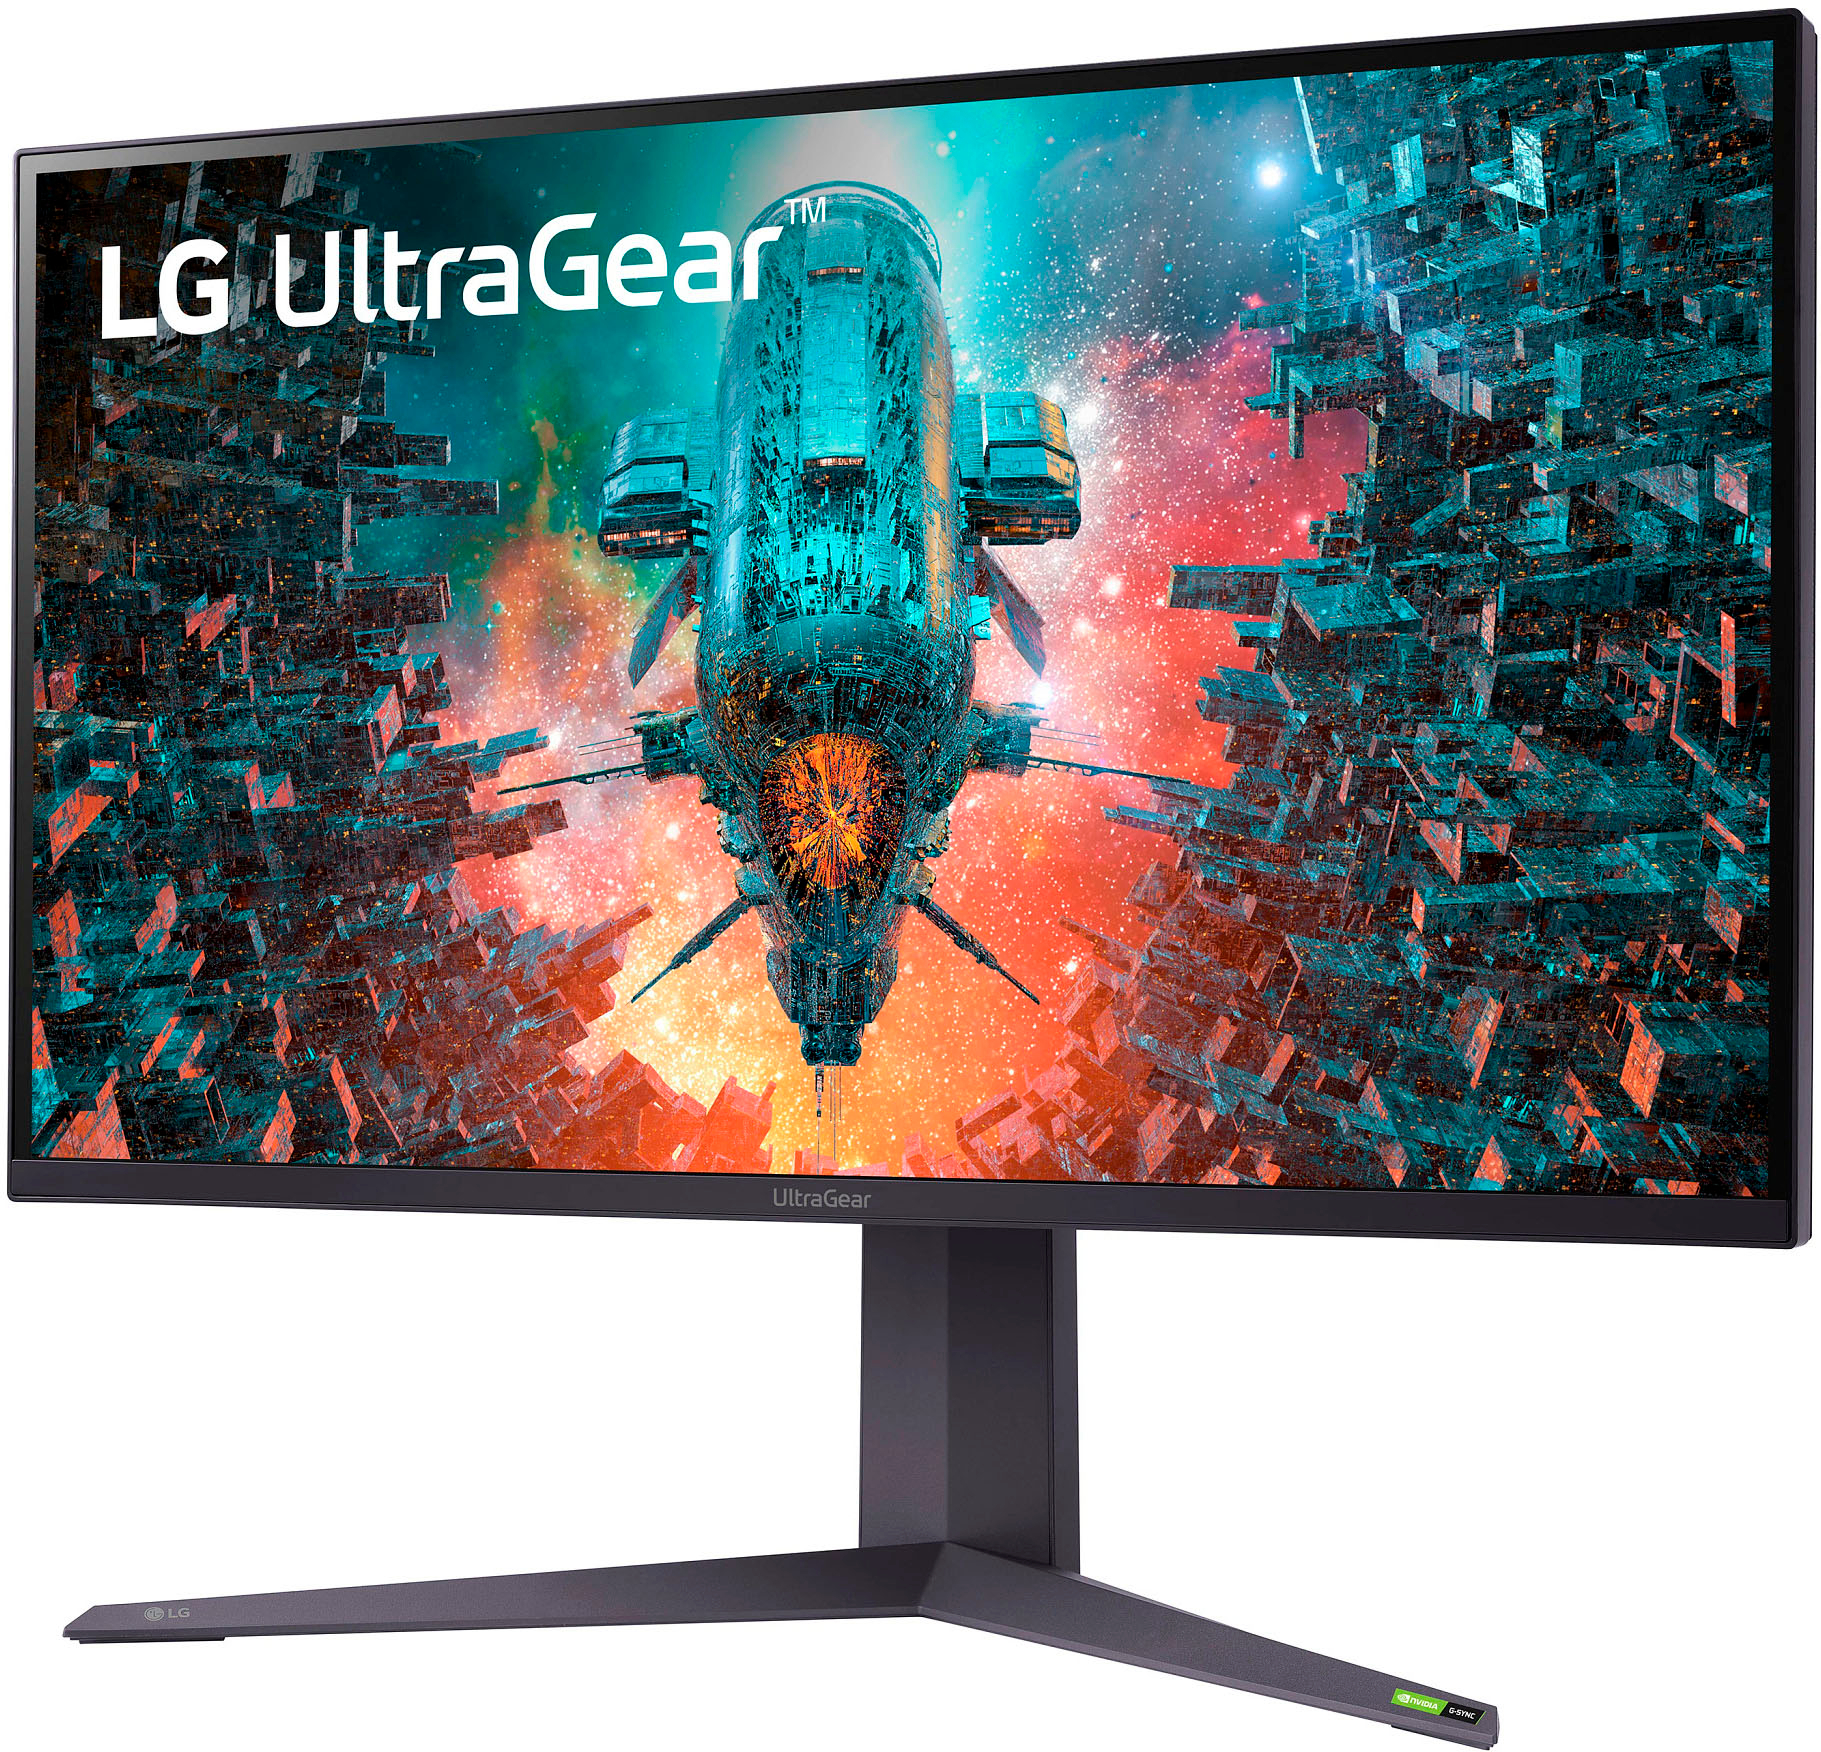 Left View: LG - UltraGear 32" IPS LED 4K UHD 1-ms G-SYNC Compatible and AMD FreeSync Premium Pro Monitor with HDR (HDMI, DisplayPort) - Black